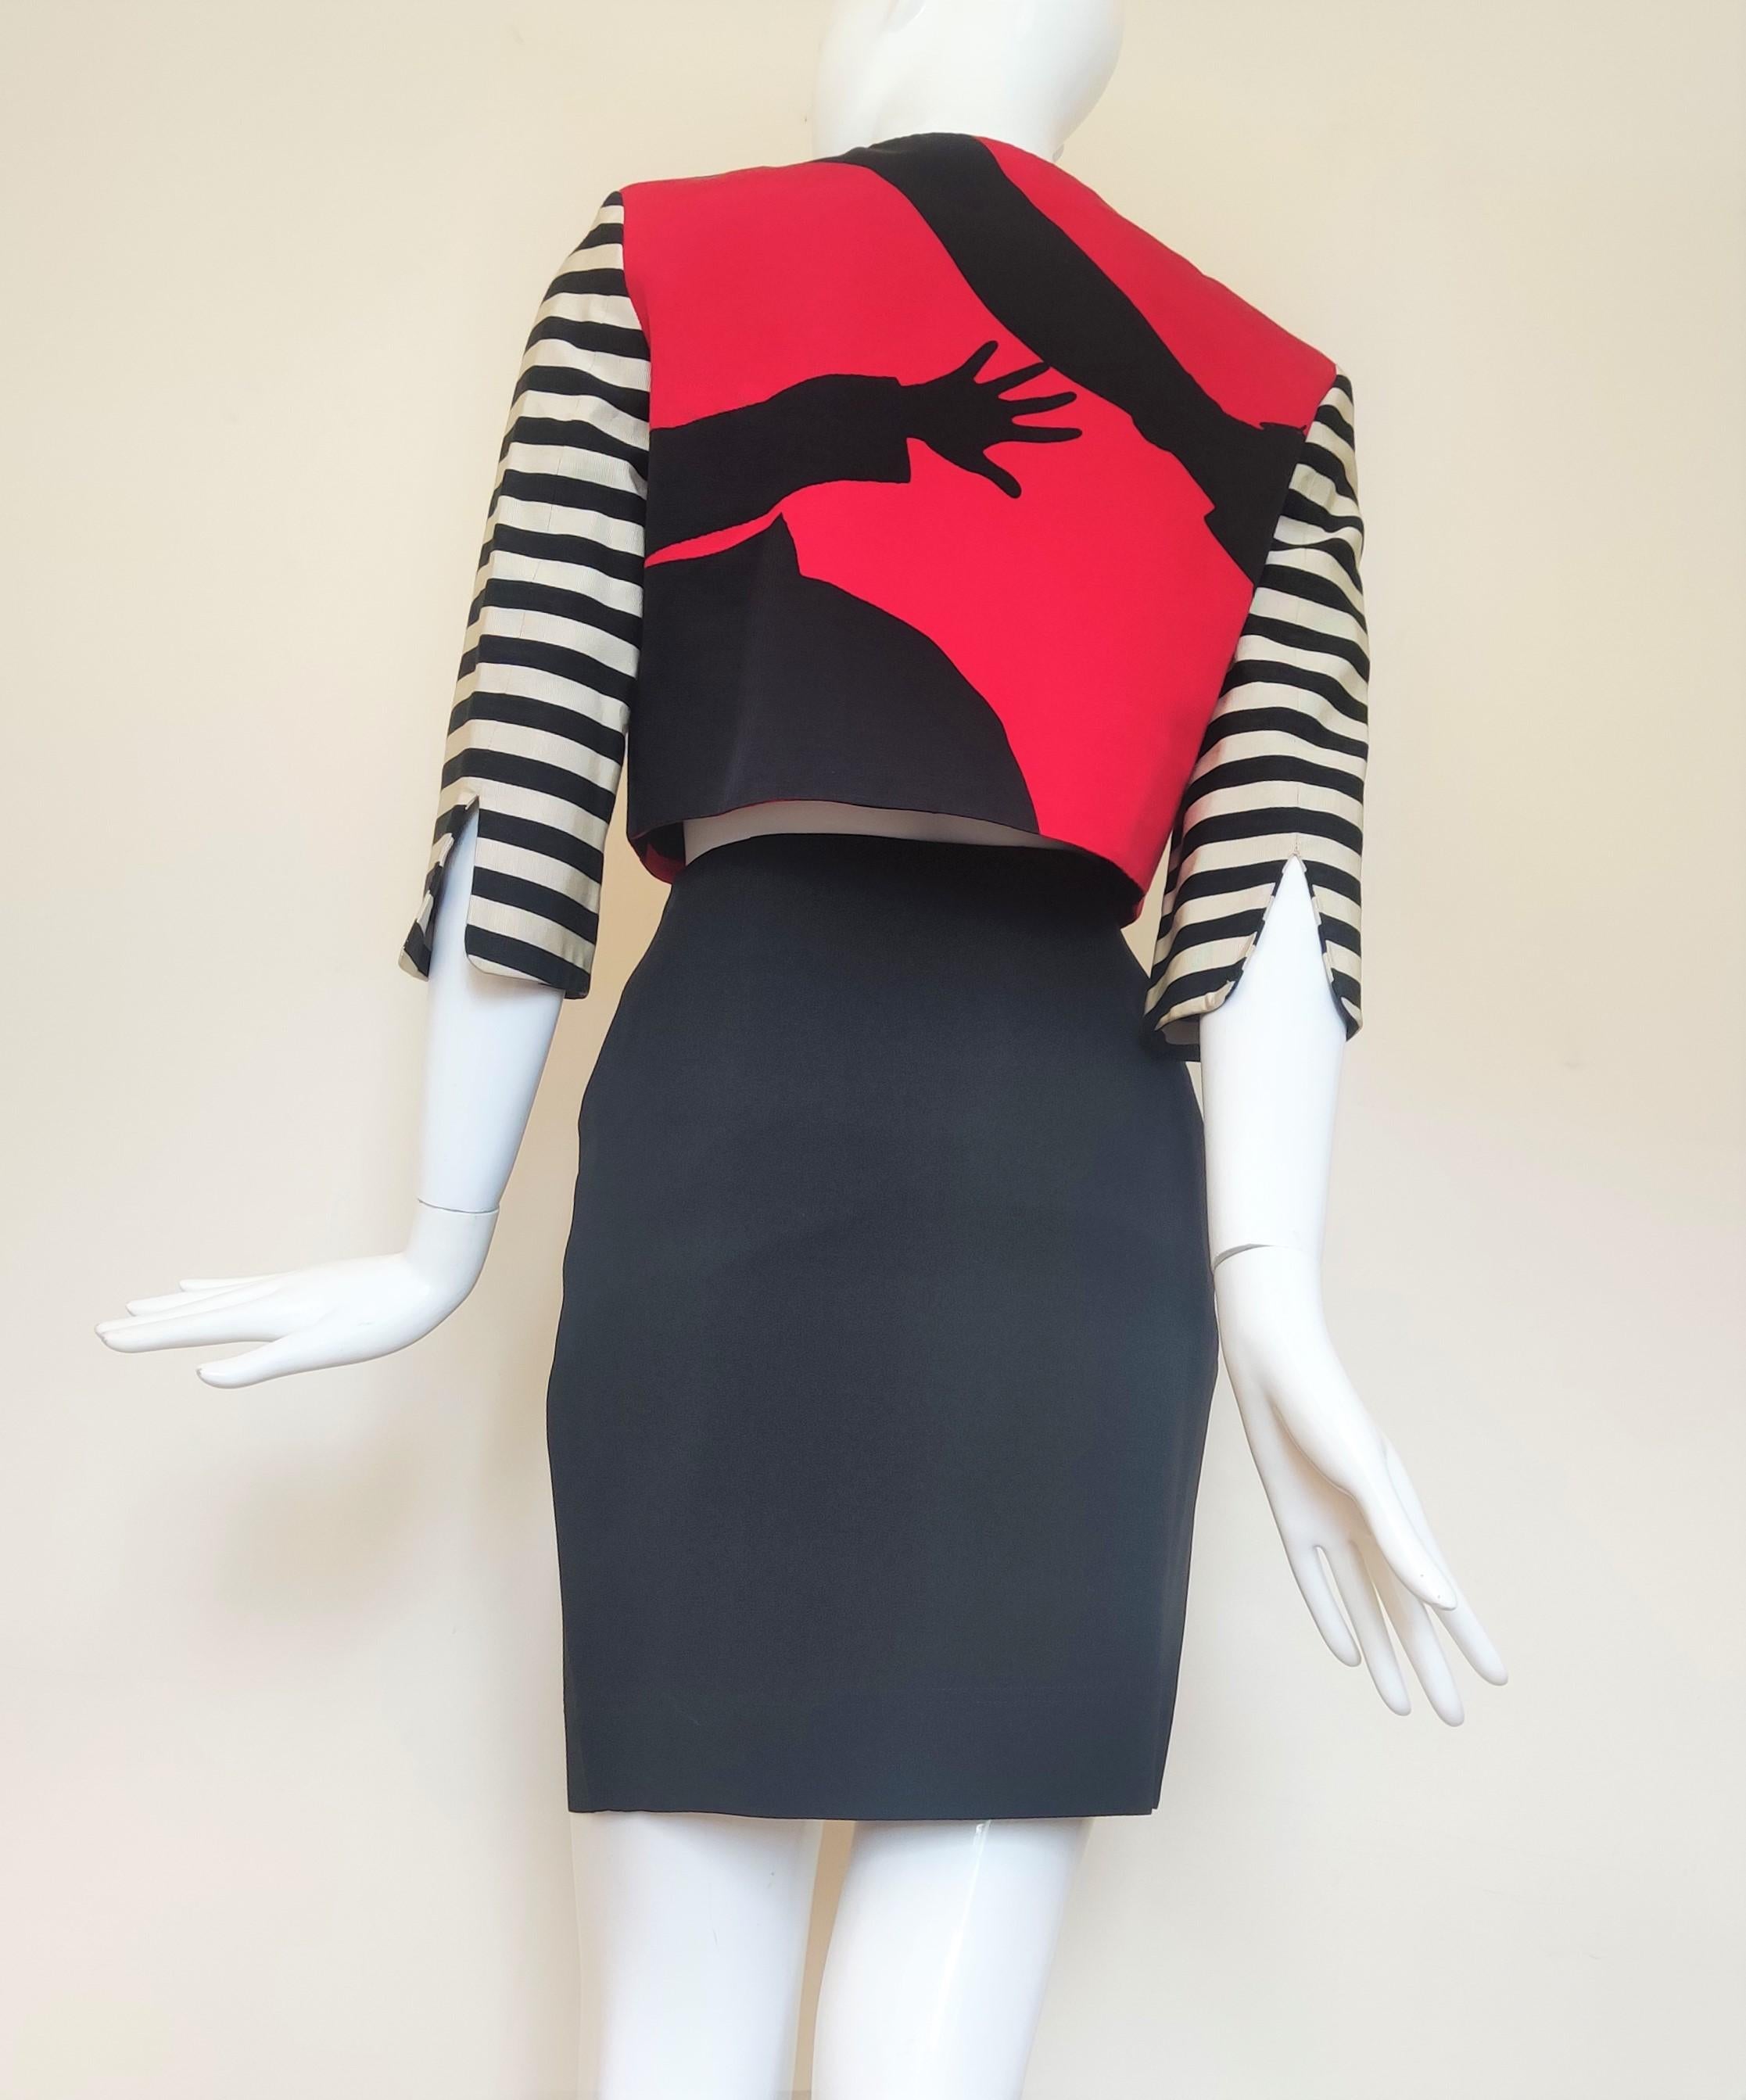 Moschino Cheap and Chic Olive Oyl Popeye Arms Legs Shadow The Nanny Couture Suit For Sale 2